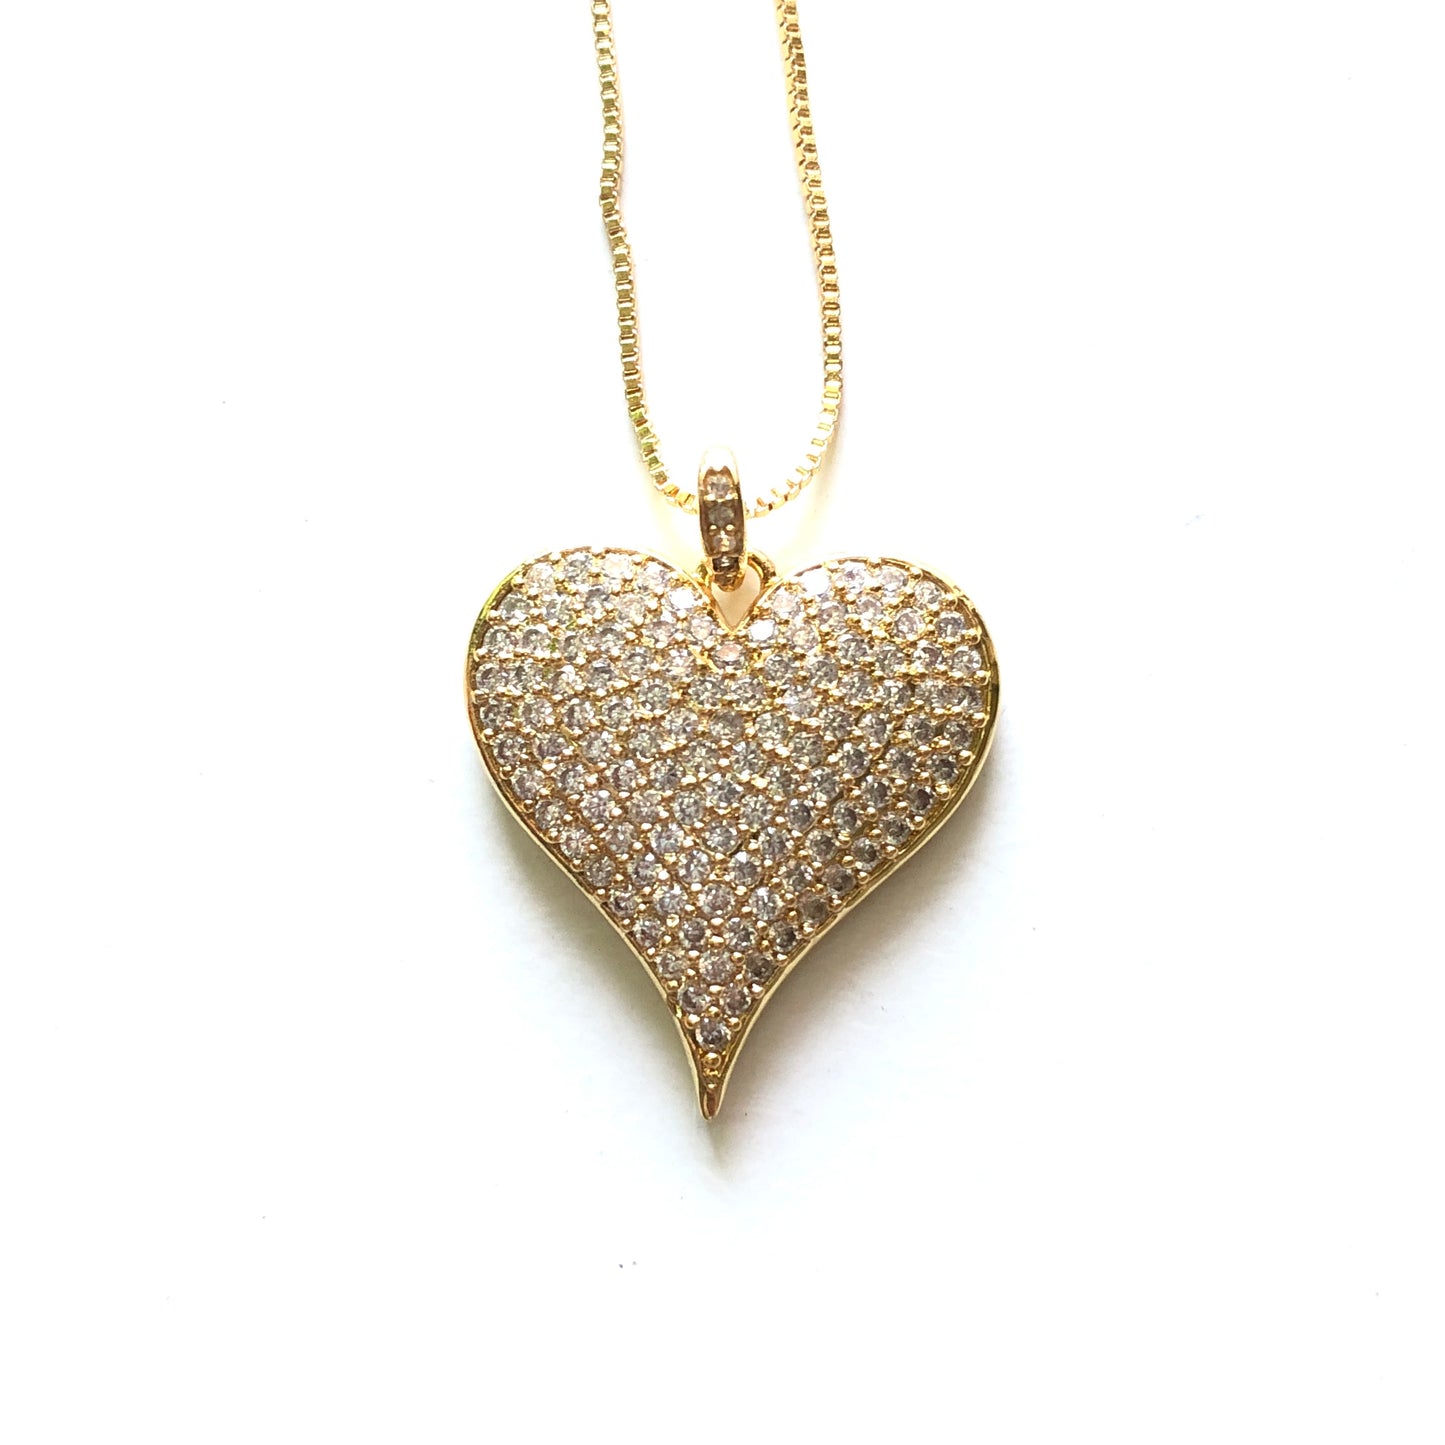 5pcs/lot 30*23mm CZ Paved Heart Necklace Gold Necklaces Love & Heart Necklaces Charms Beads Beyond